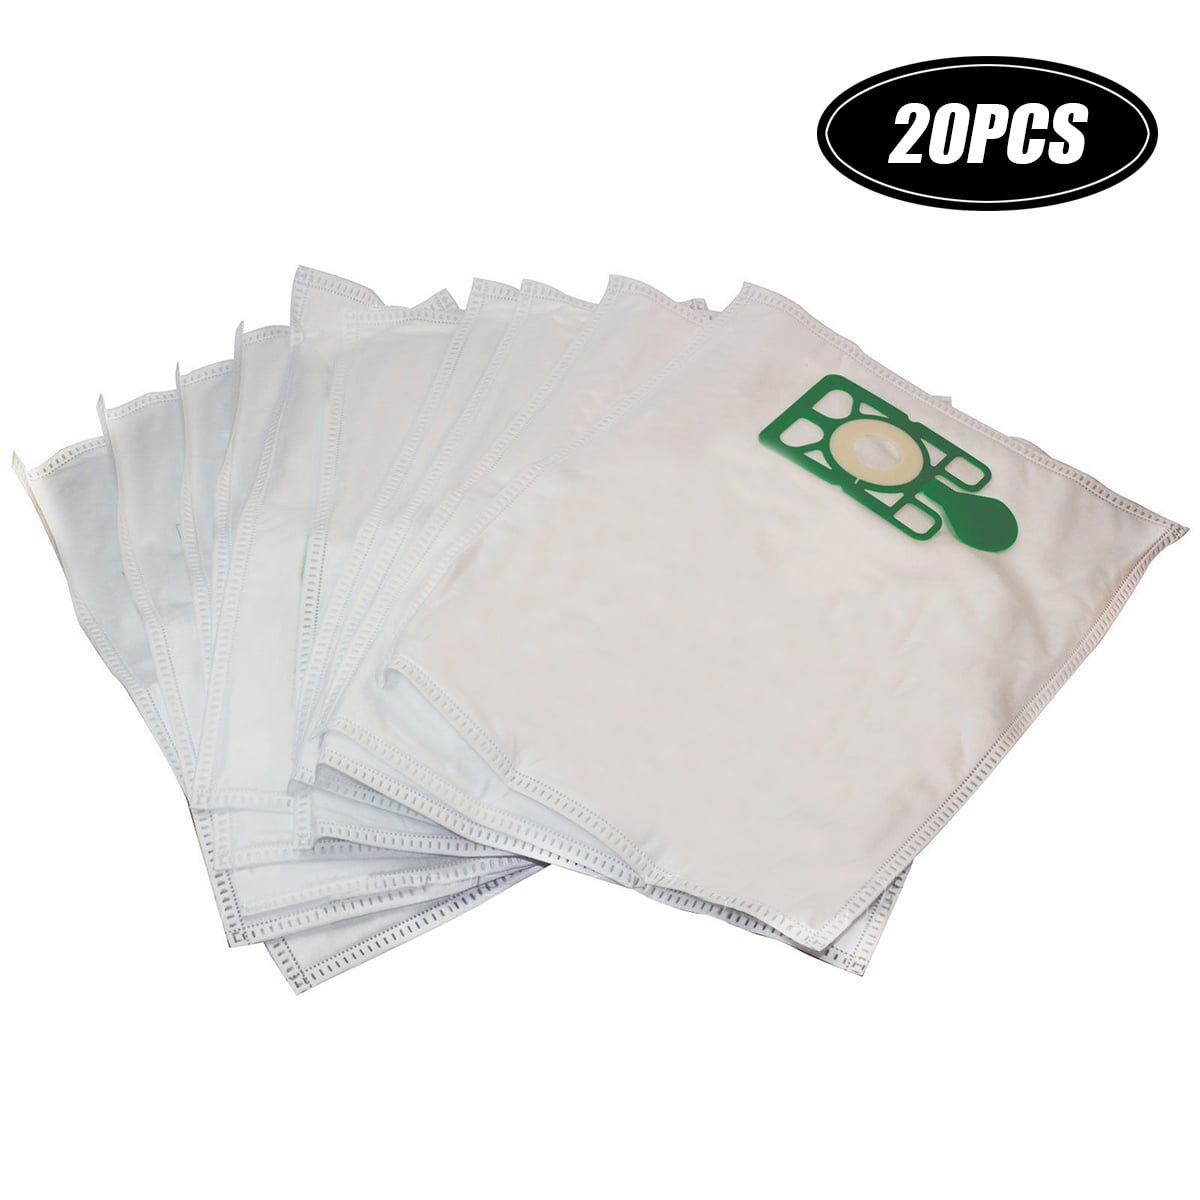 10 Pack Vacuum Dust Bags Designed to Fit Numatic Henry Hetty Basil James Micro 